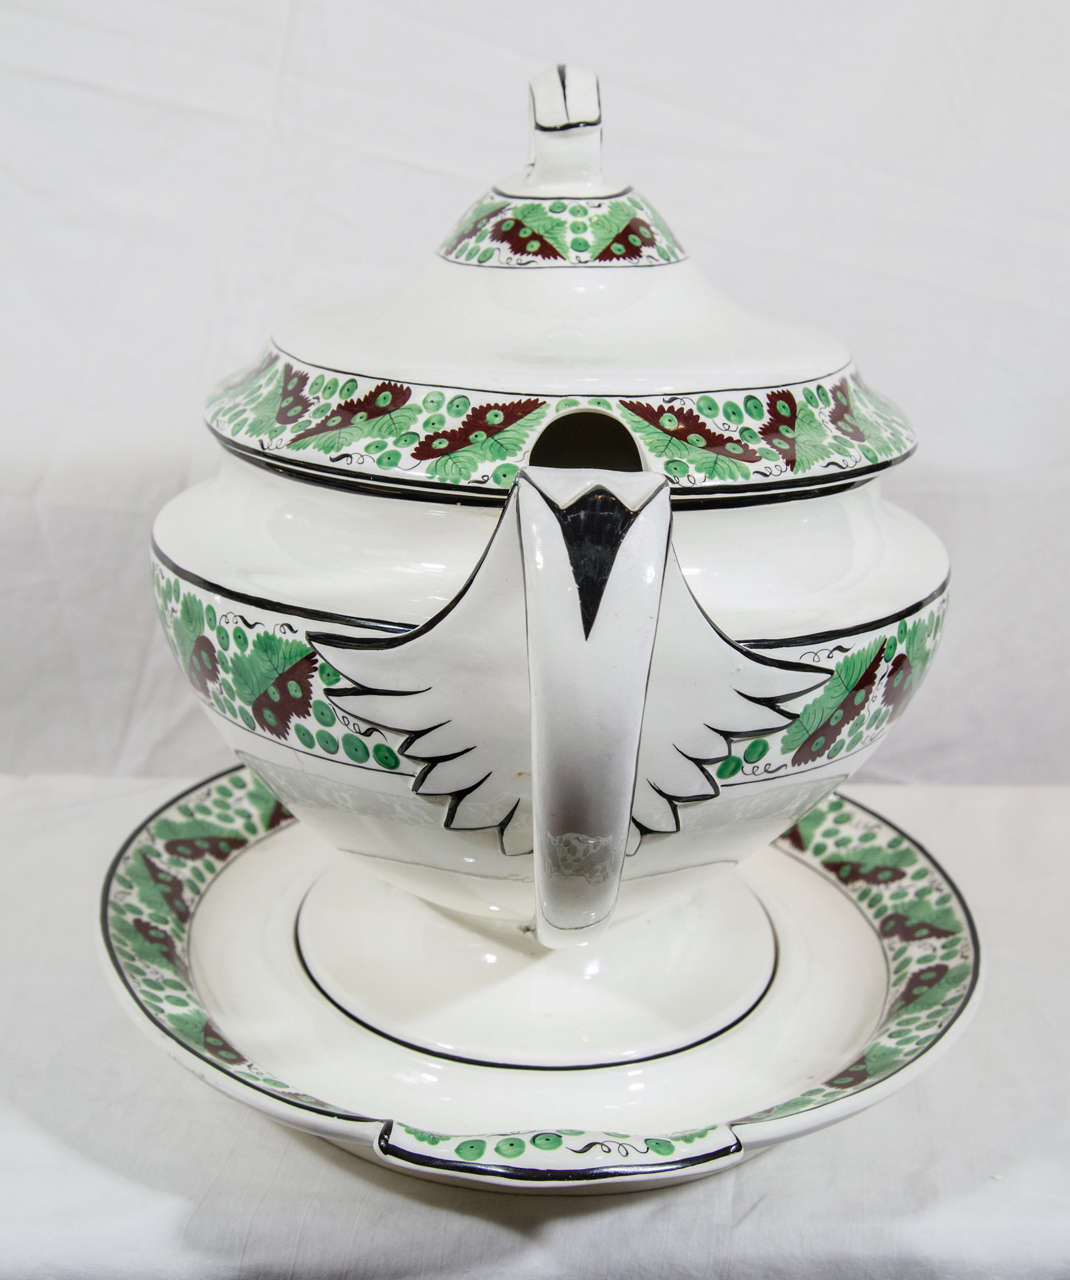 Neoclassical An Antique Spode Creamware Soup Tureen with Oak leaves and Acorns